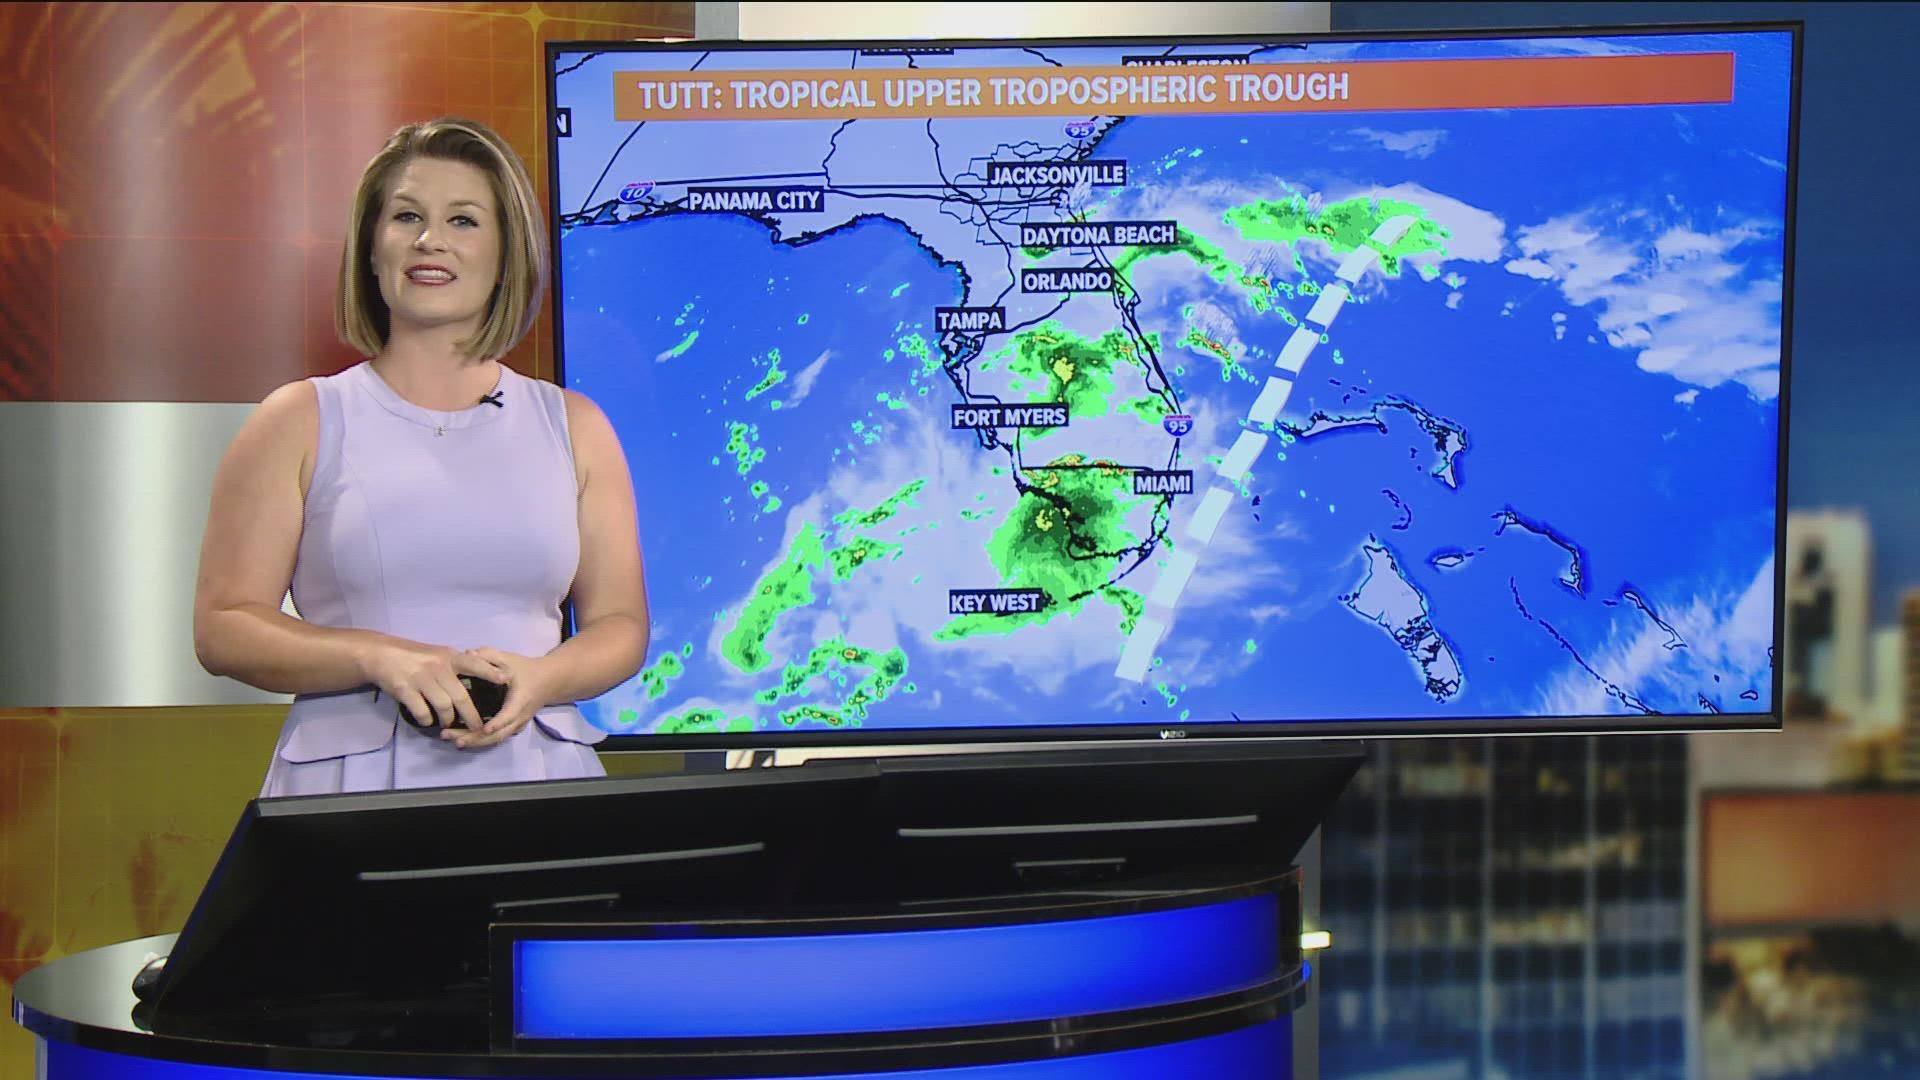 A TUTT, or tropical upper tropospheric trough, means rain for Florida to end off the work week. These types of systems can act as a double agent in the tropics, too.